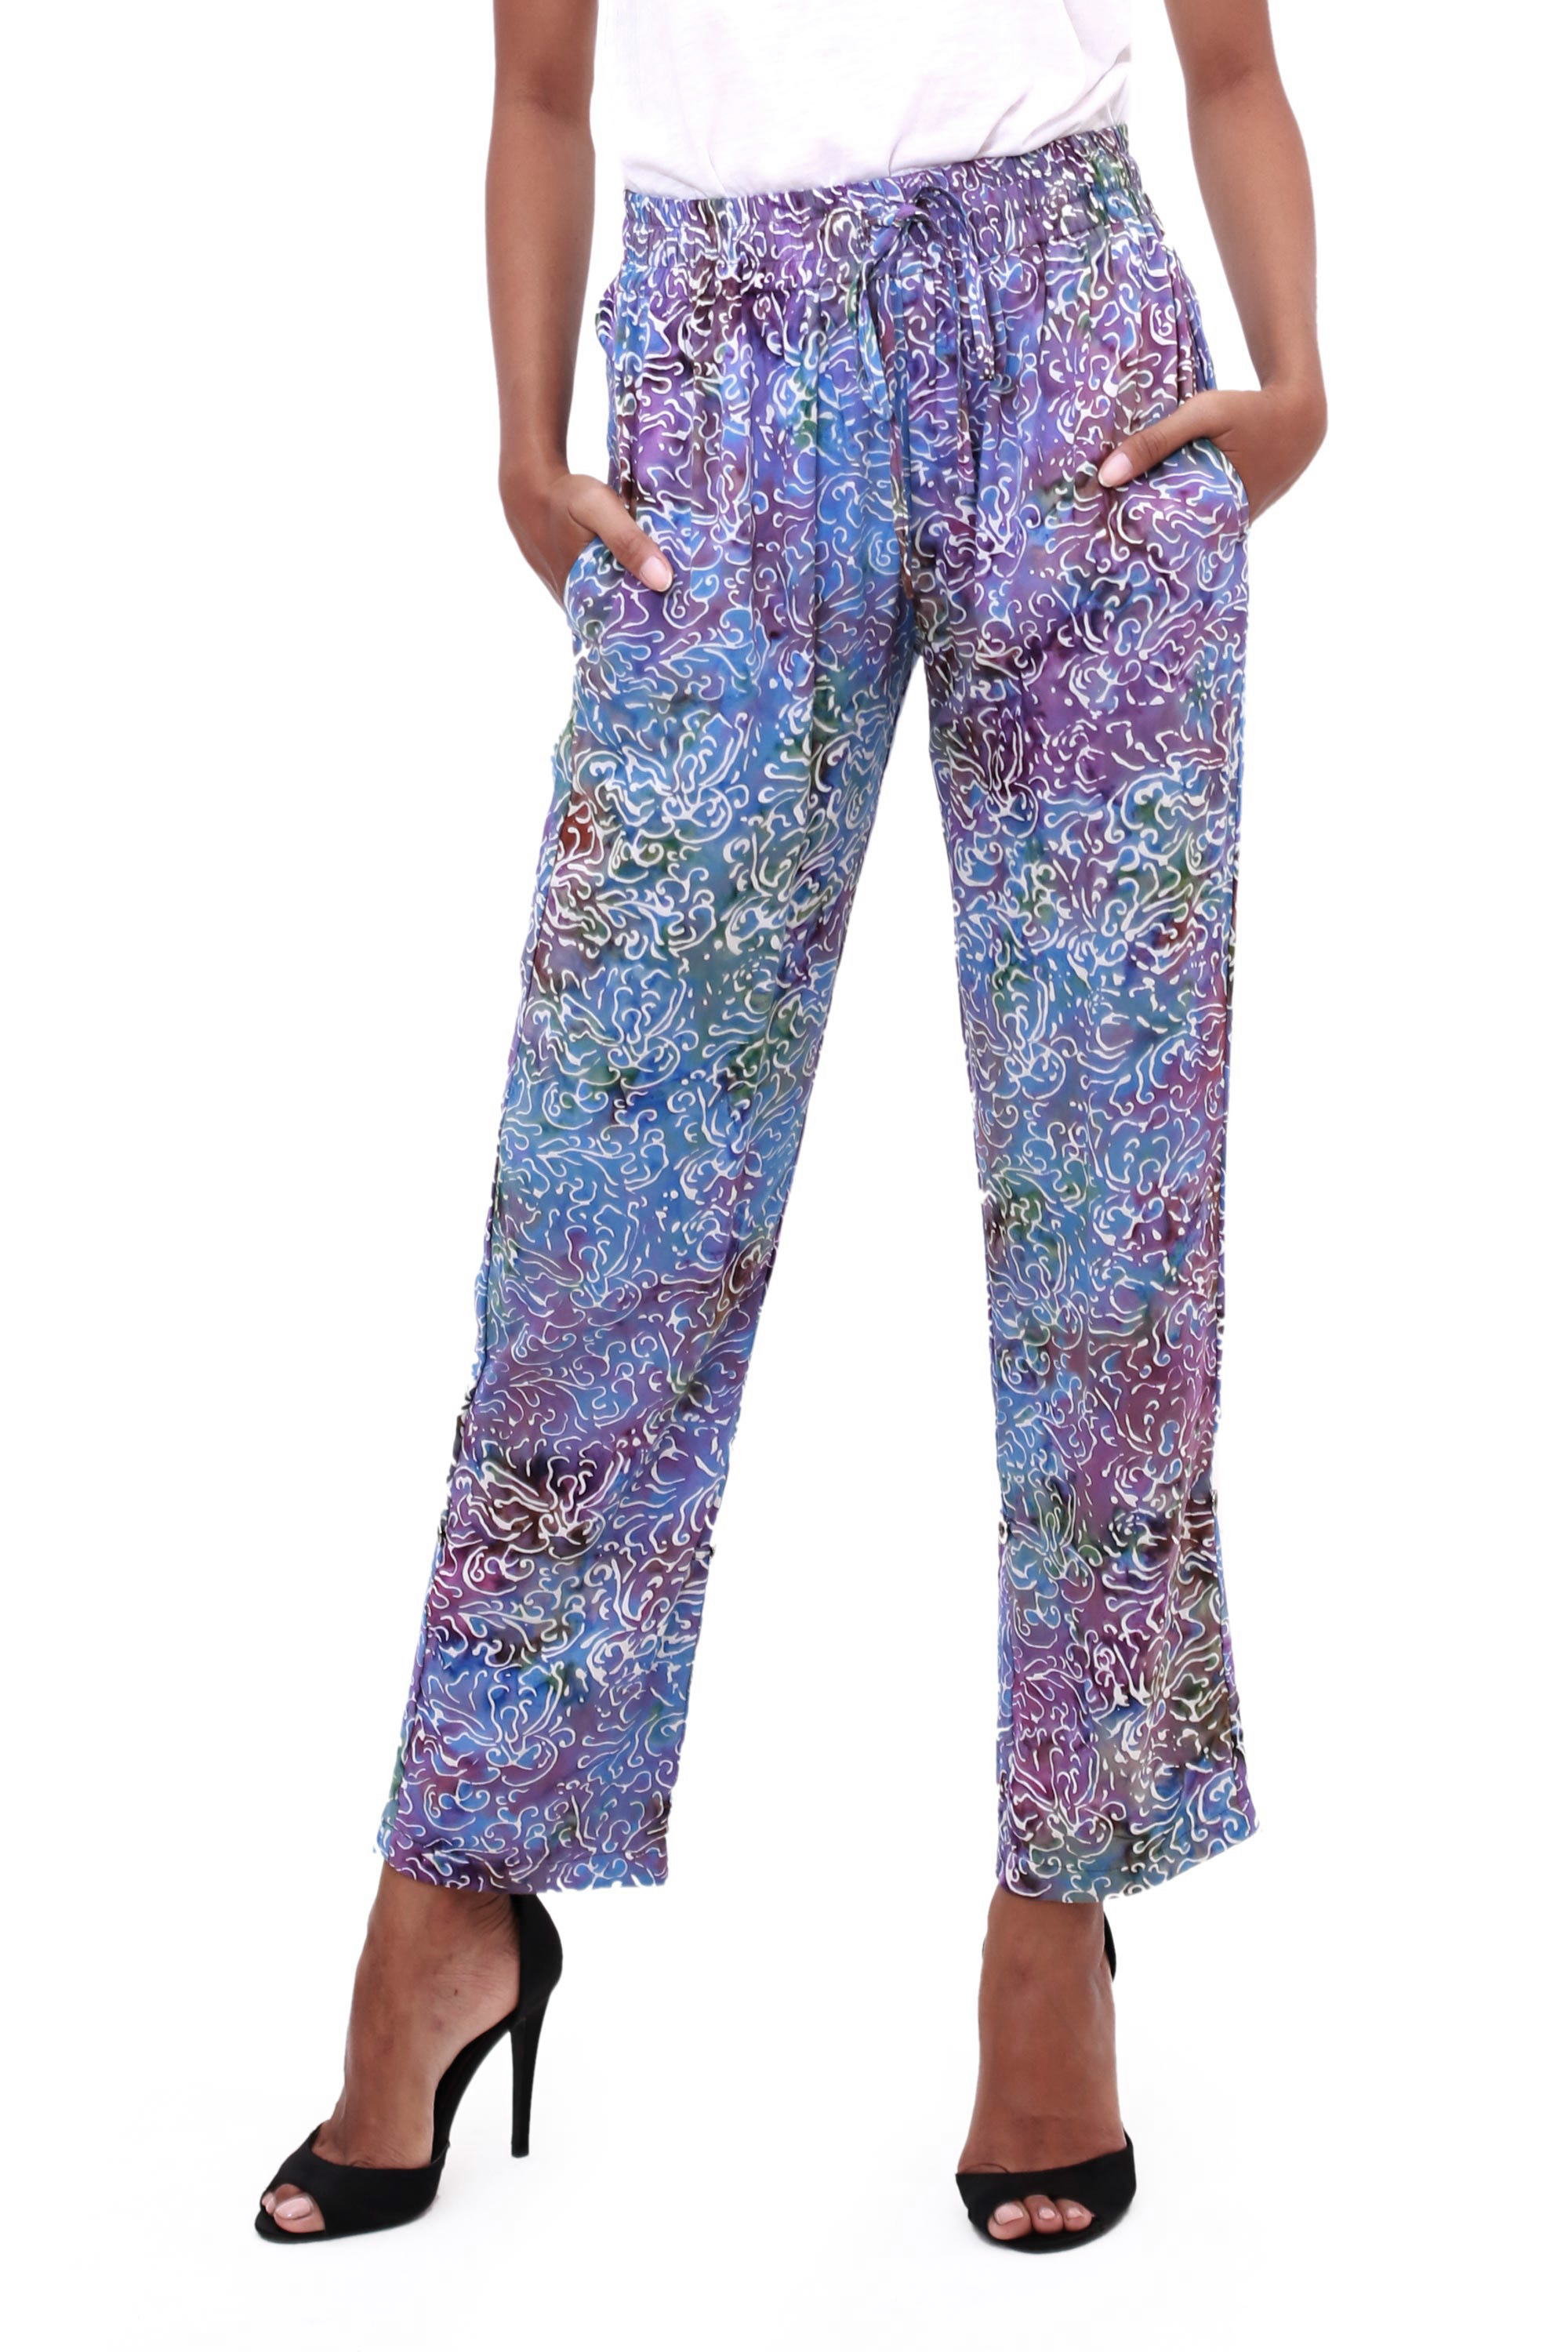 UNICEF Market | Hand-Stamped Batik Rayon Pants from Bali - Rainbow Clouds